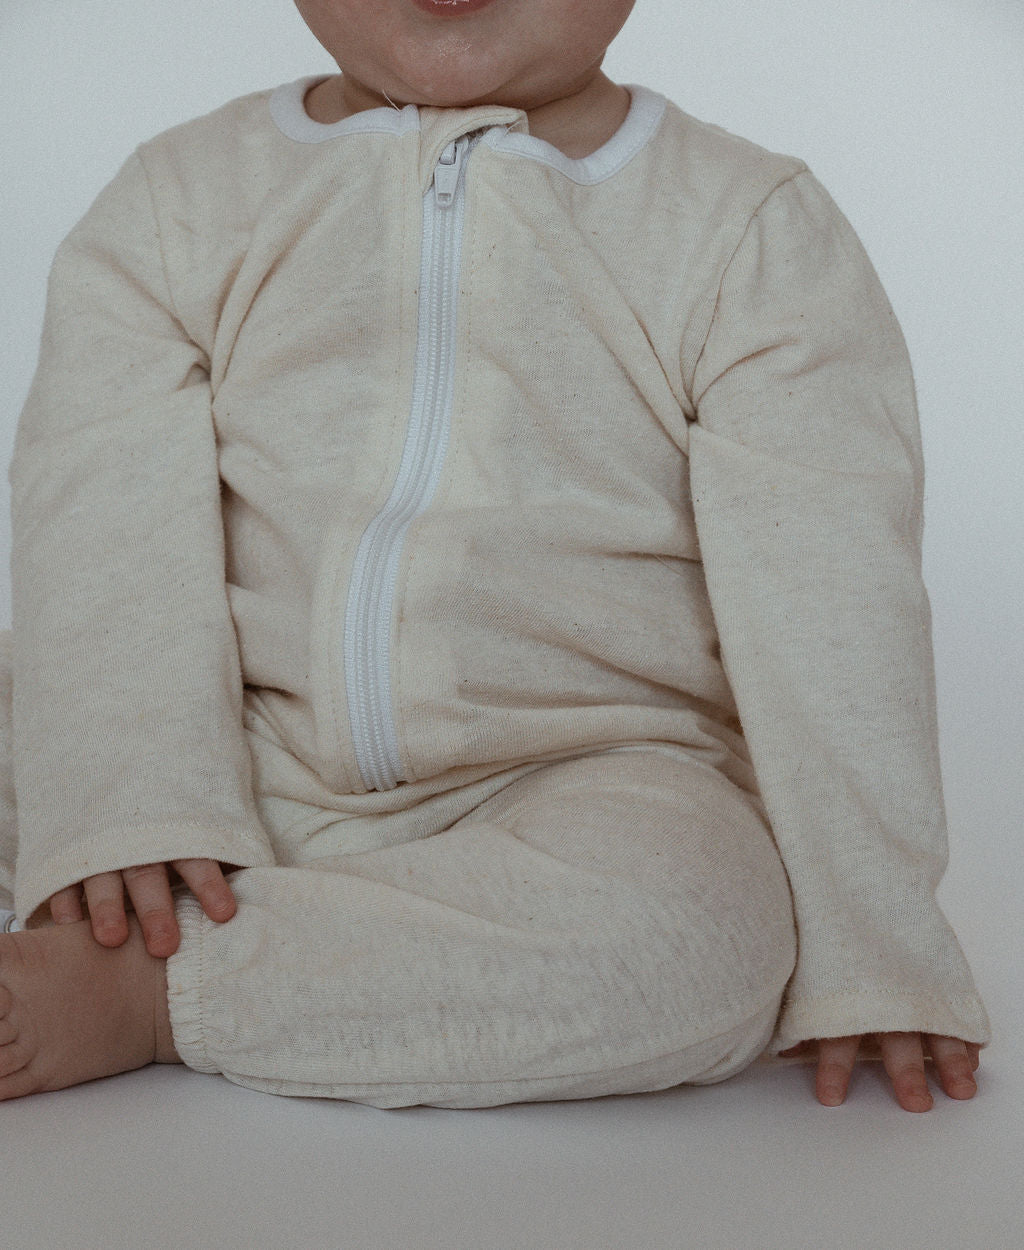 THE ORB SUIT JERSEY (6-12 months)